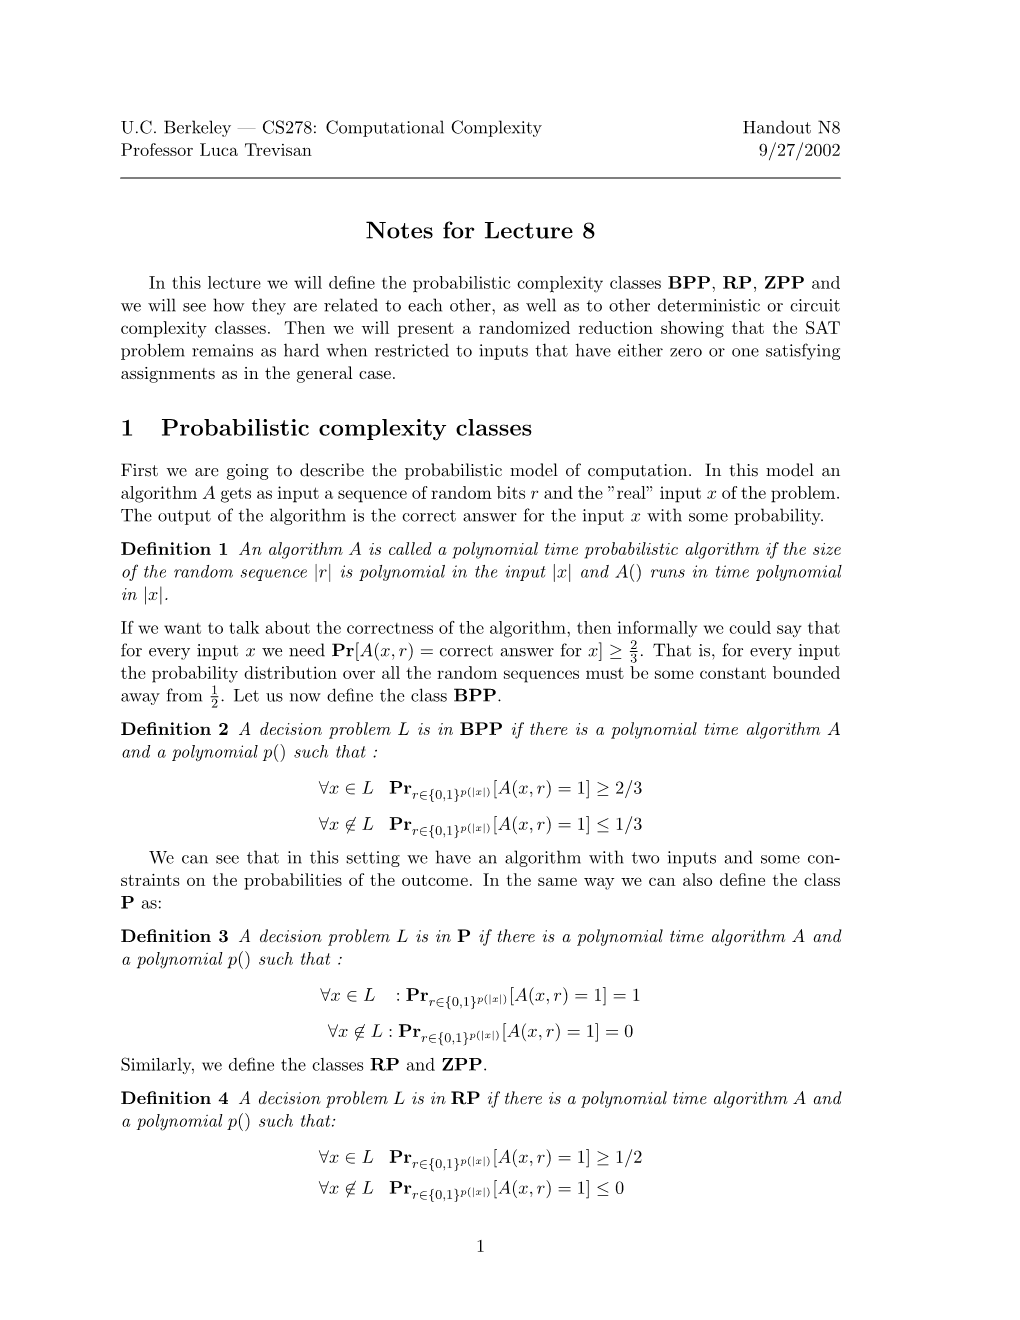 Notes for Lecture 8 1 Probabilistic Complexity Classes